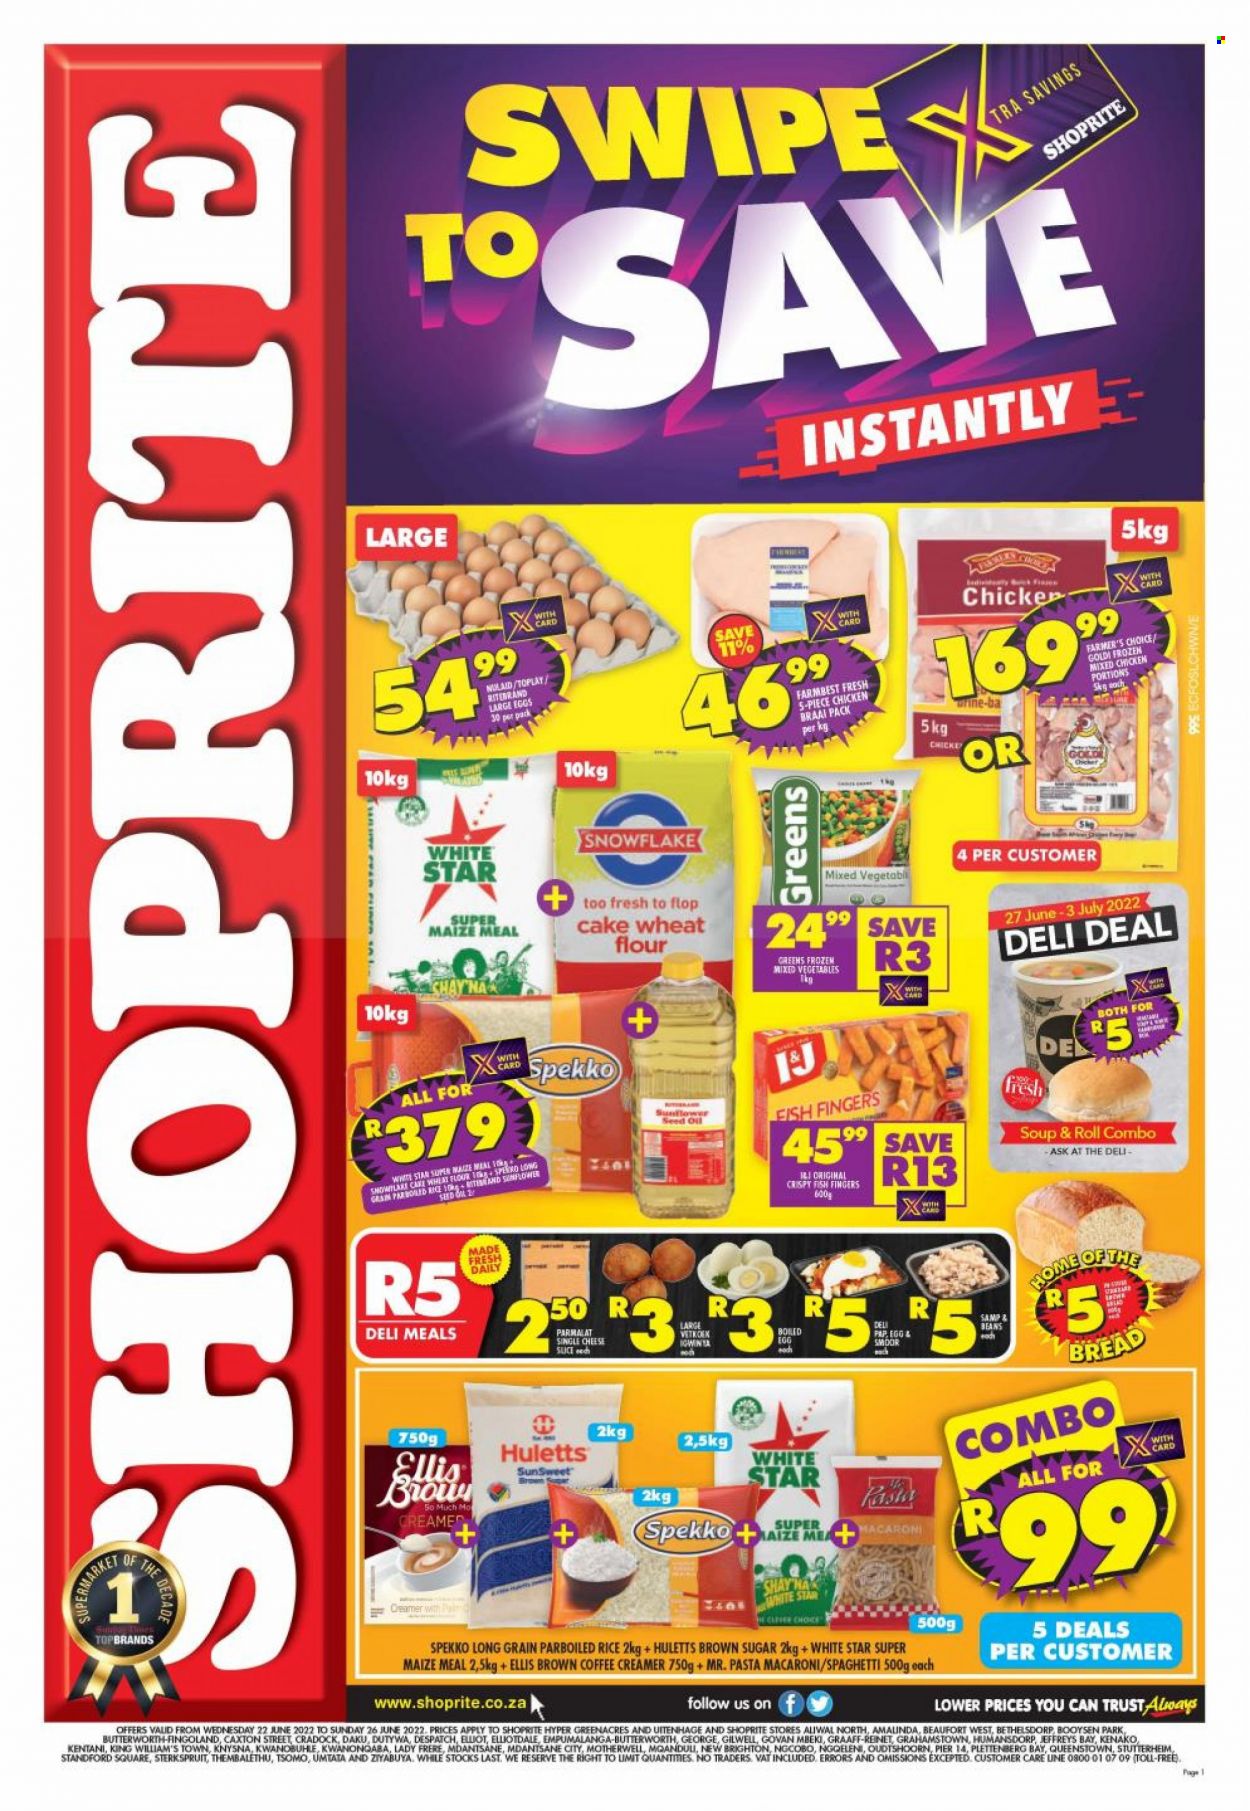 Shoprite catalogue  - 22/06/2022 - 26/06/2022 - Sales products - bread, fish, fish fingers, fish sticks, spaghetti, macaroni, soup, pasta, cheese, Parmalat, Ellis Brown, large eggs, creamer, mixed vegetables, cane sugar, flour, wheat flour, maize meal, cake flour, Huletts, White Star, parboiled rice, Spekko, sunflower oil, oil, pin. Page 1.